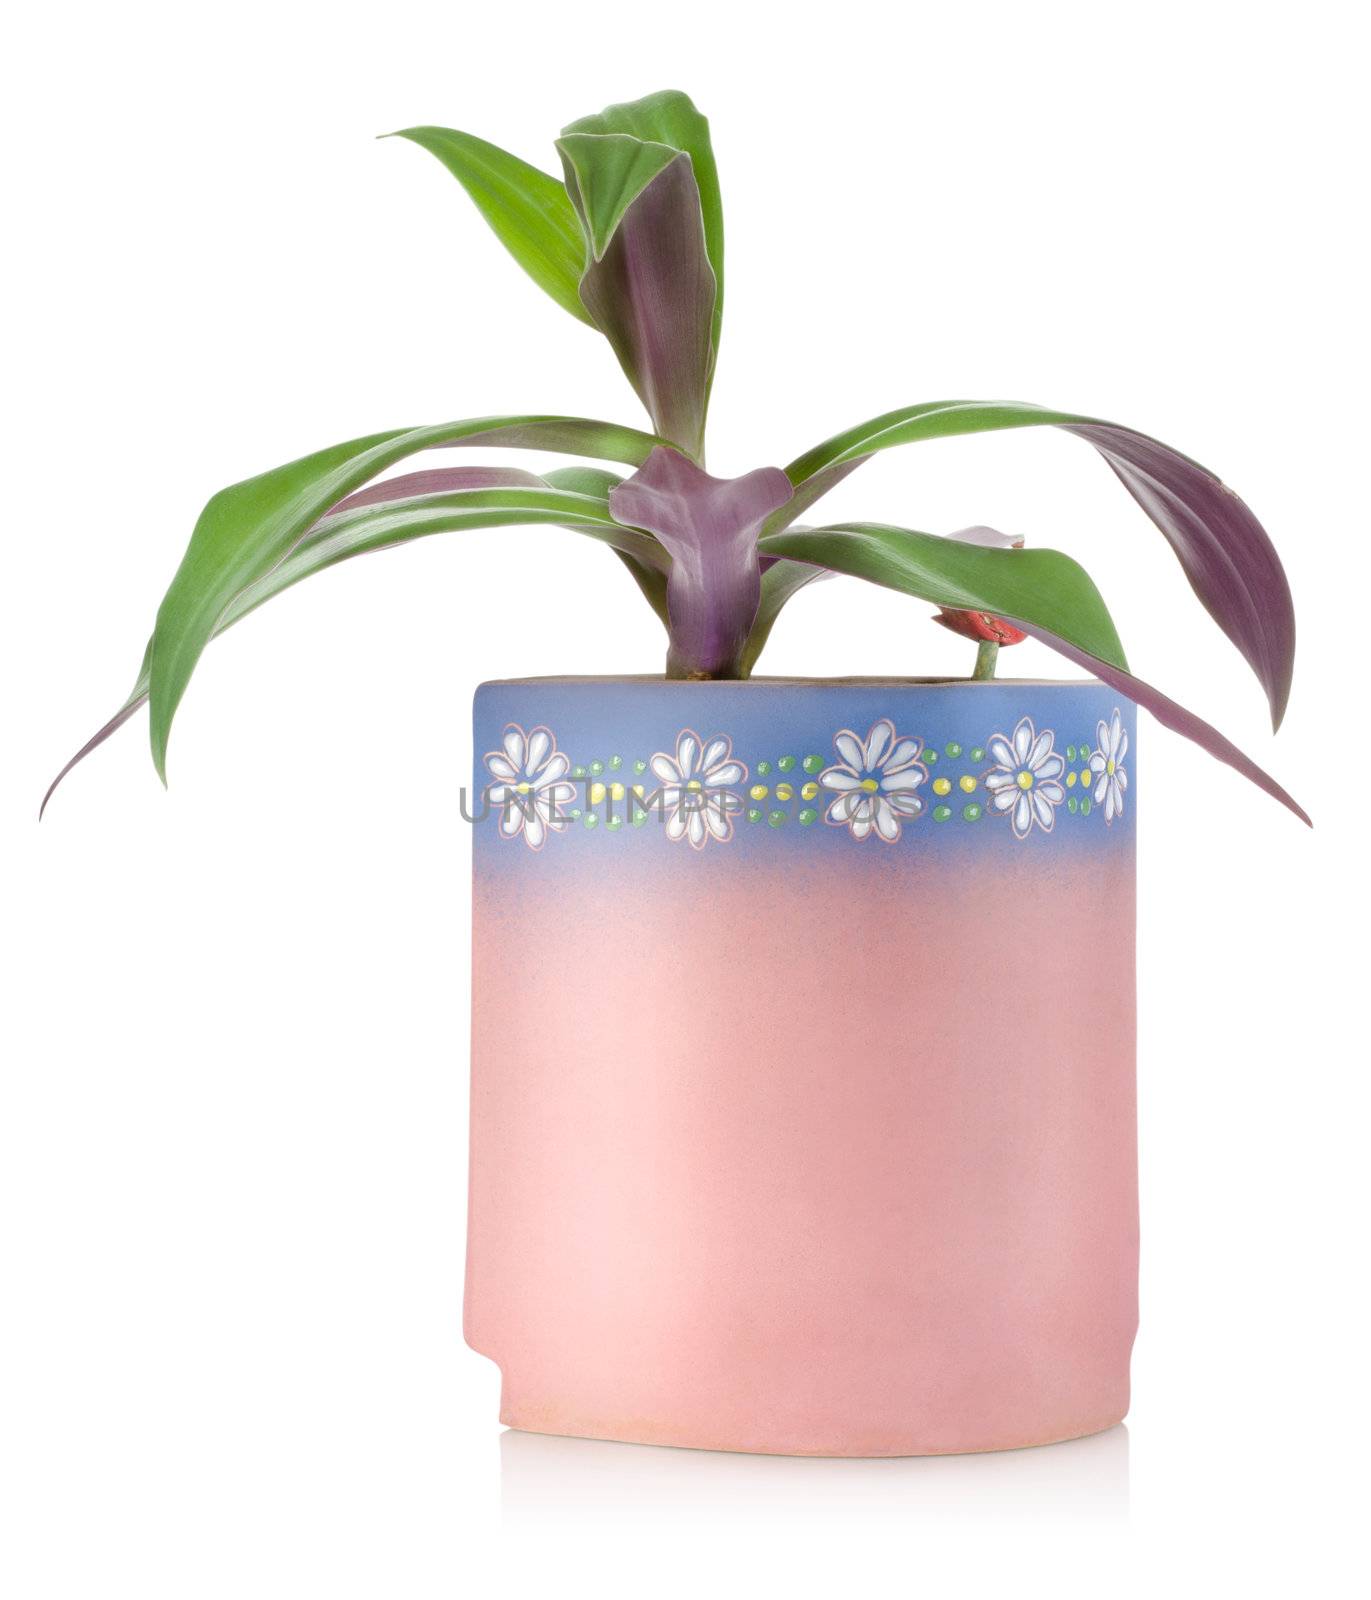 Potted plant isolated on a white background